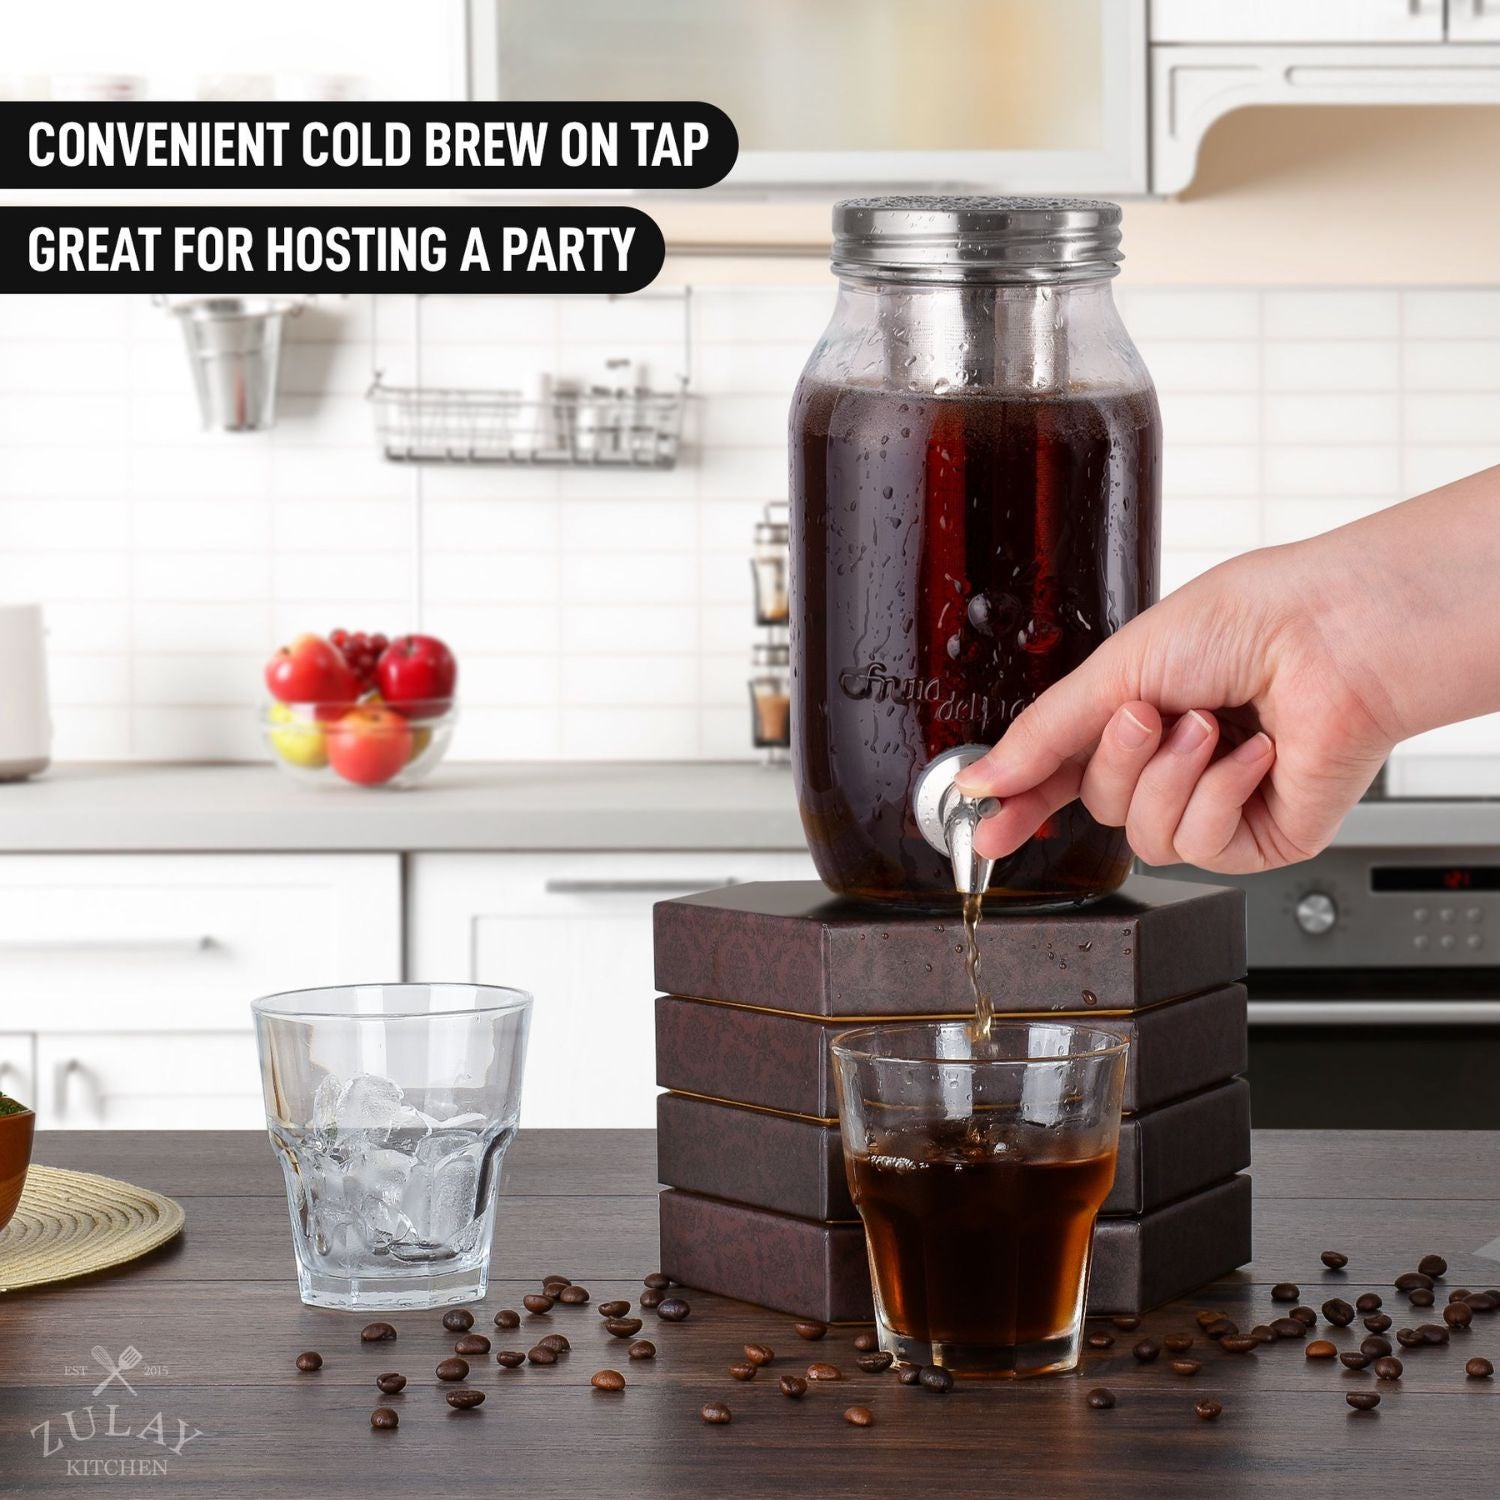 Soulhand Cold Brew Coffee Maker, Cold Dripper Coffee Brewer – soulhand